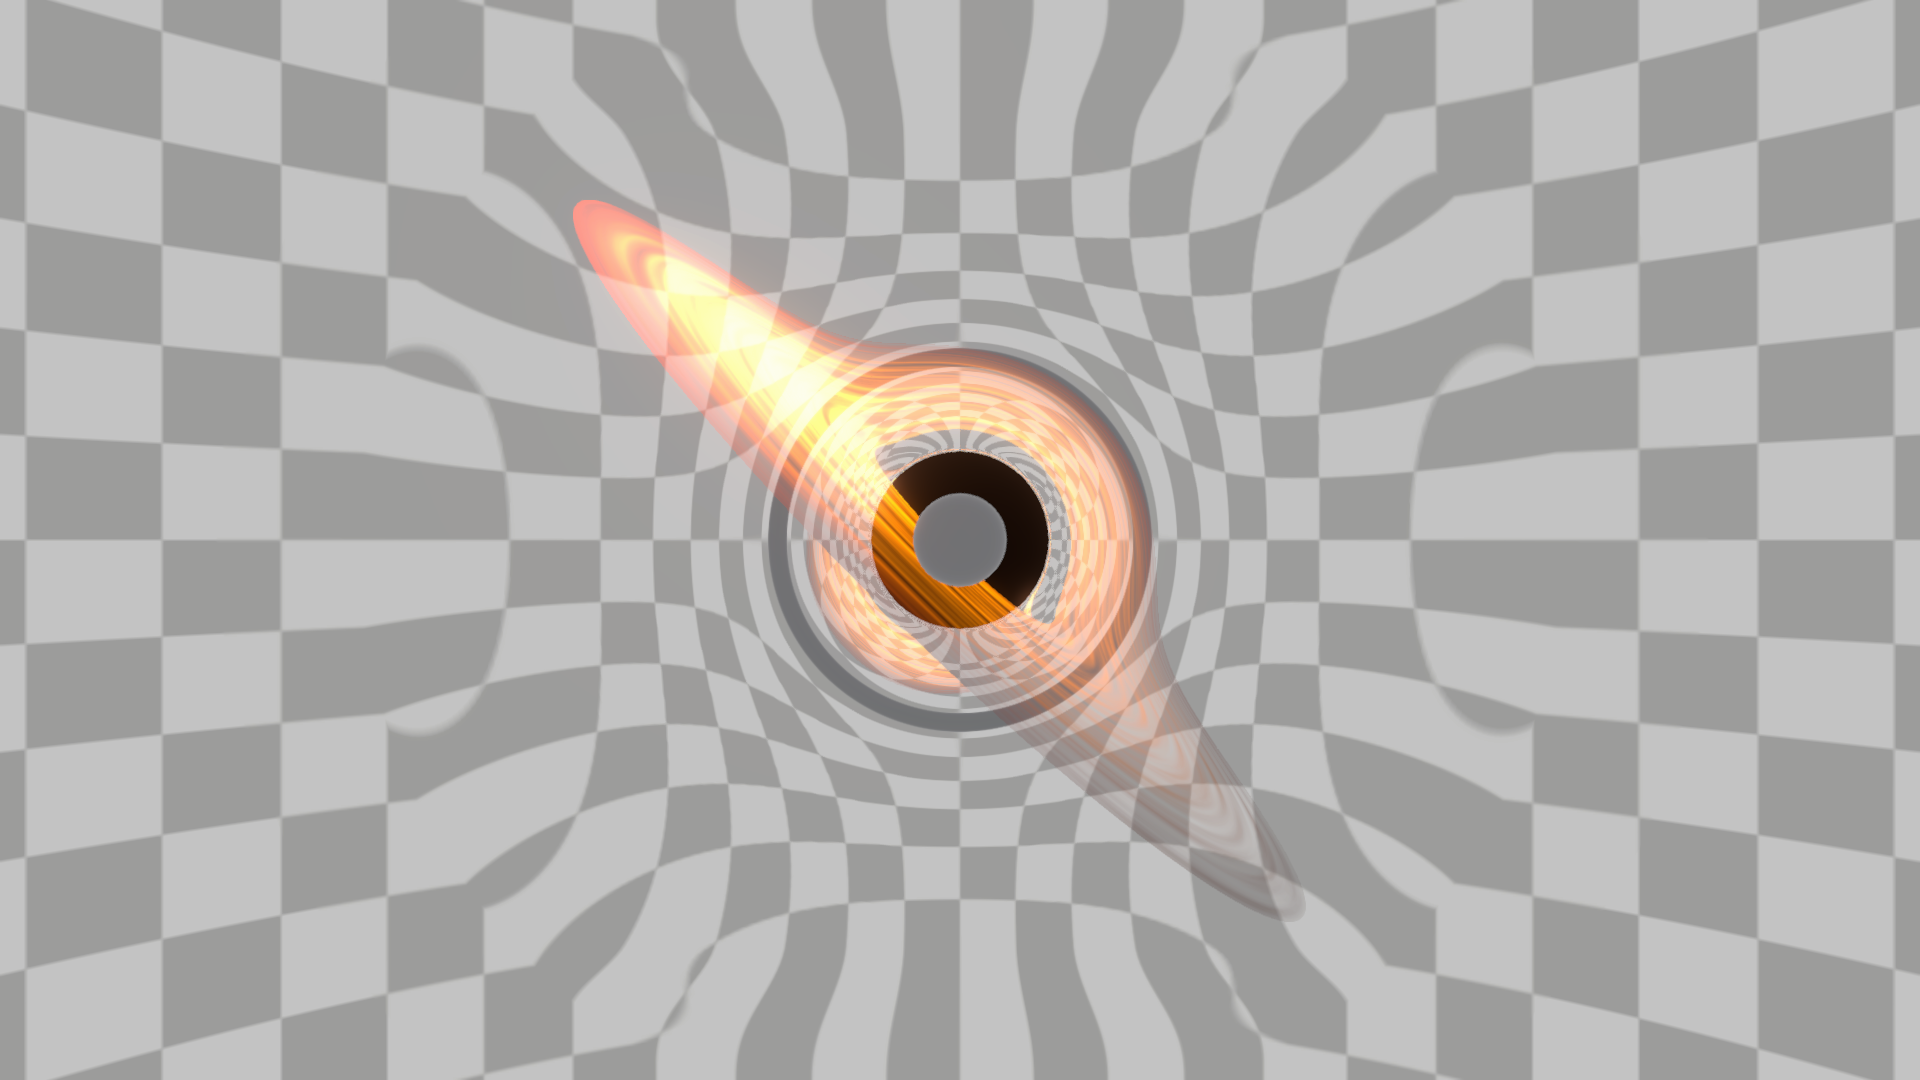 You can see the grey sphere object in front of the black hole, while it has been placed directly behind it (but within the black hole’s sphere <em>gameObject</em>).